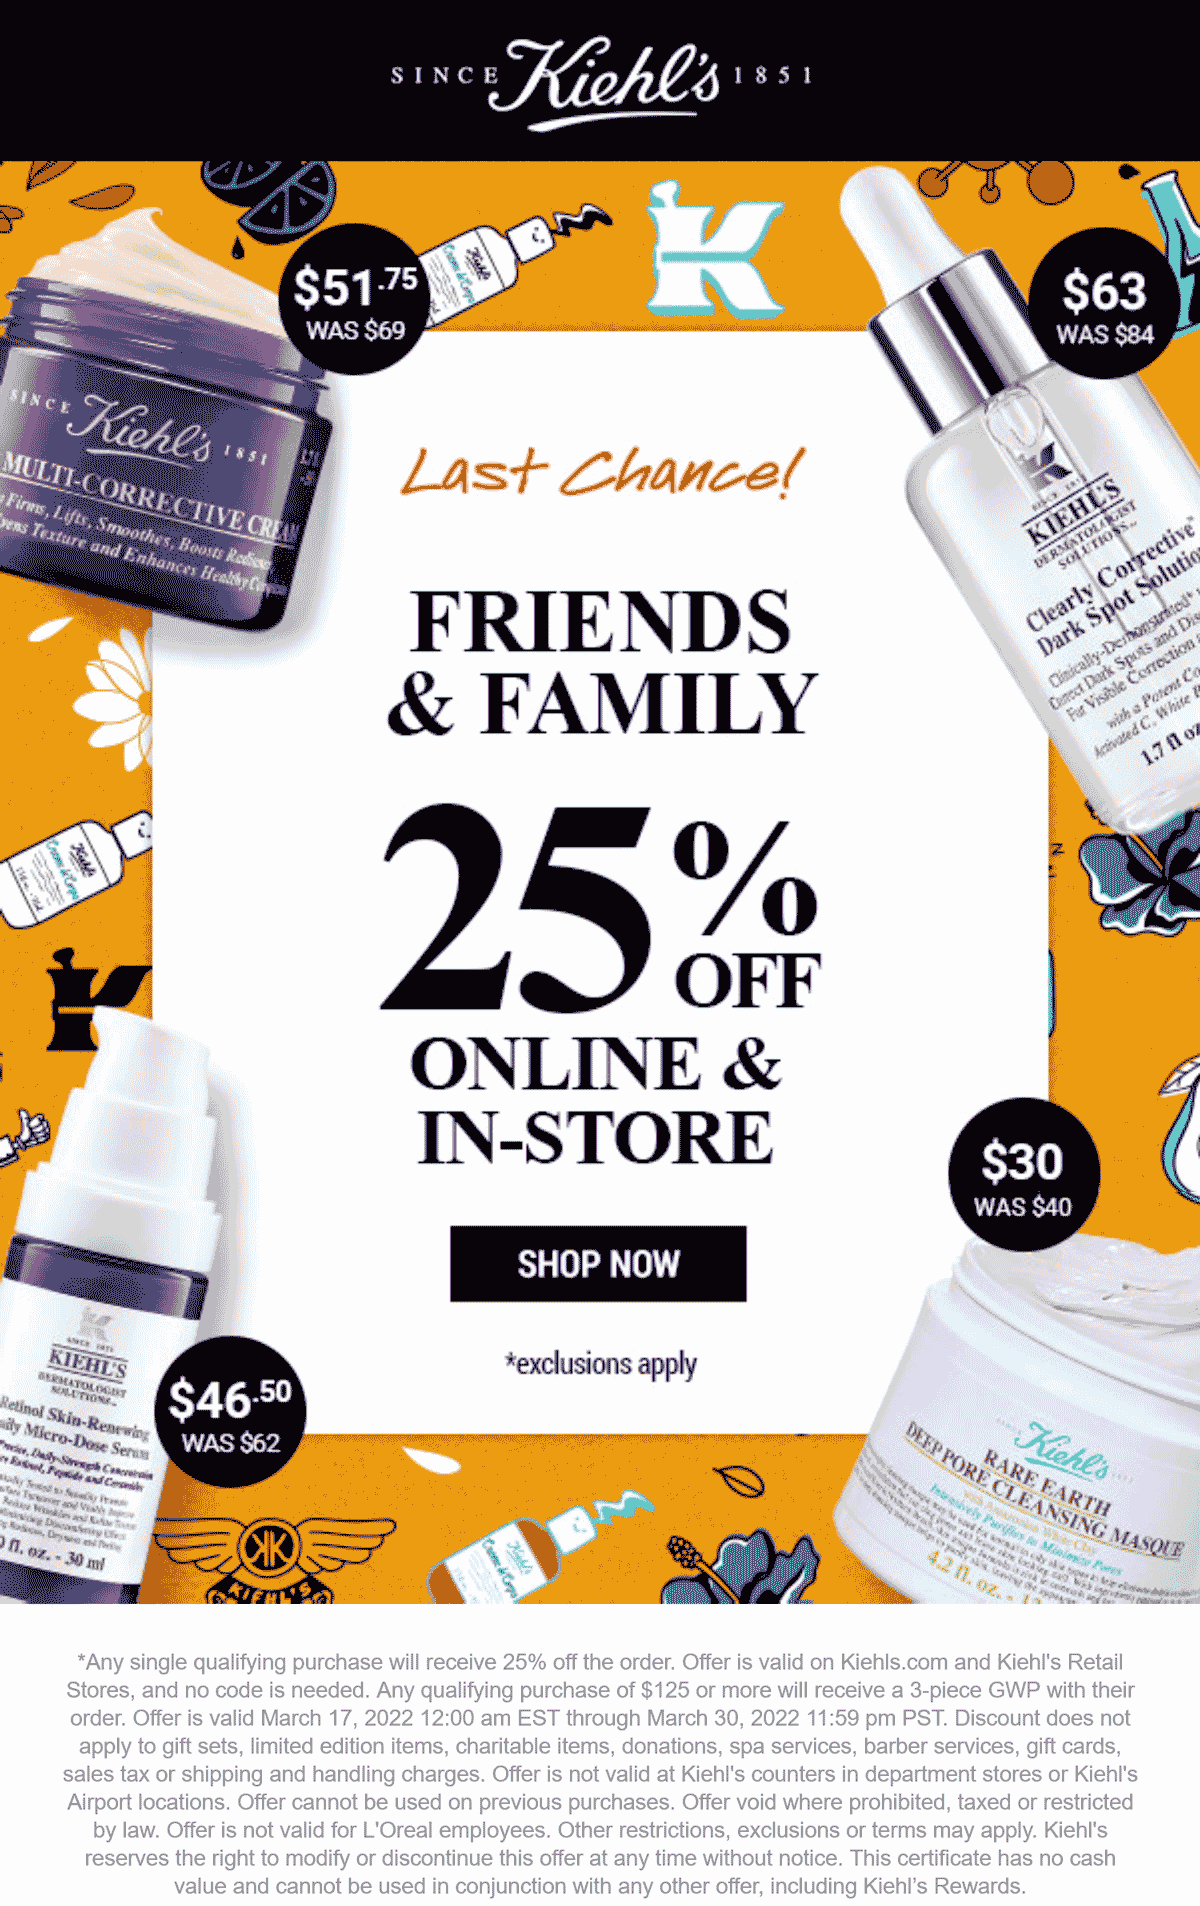 Kiehls stores Coupon  25% off today at Kiehls, ditto online #kiehls 